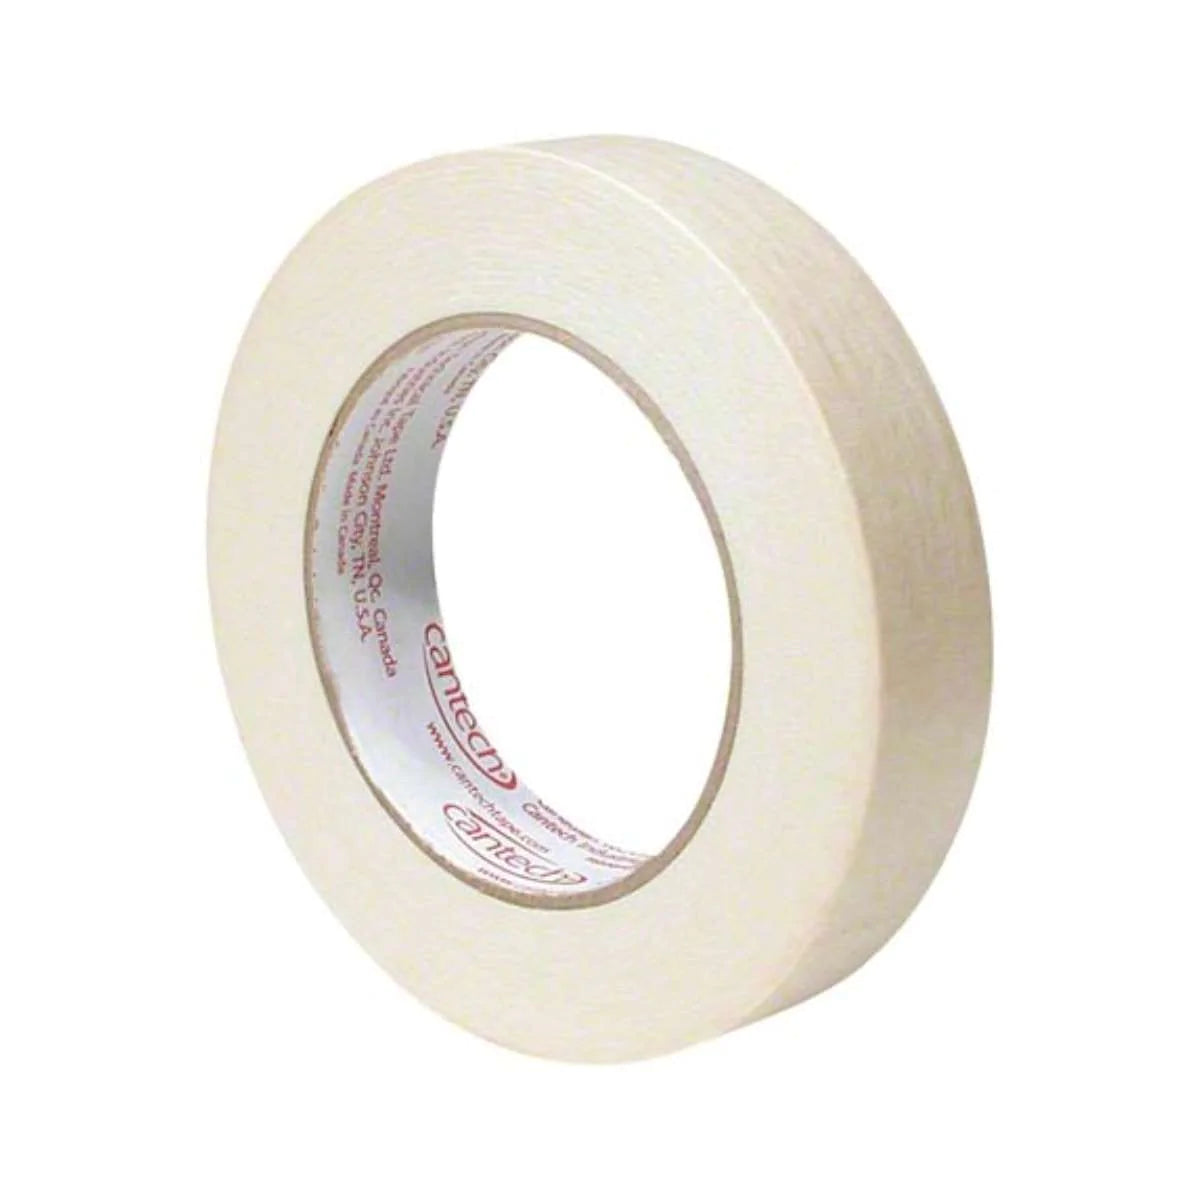 Cantech MASKING TAPE Cantech - Utility Masking Tape - 18mm x 55m Roll - Item #302241855